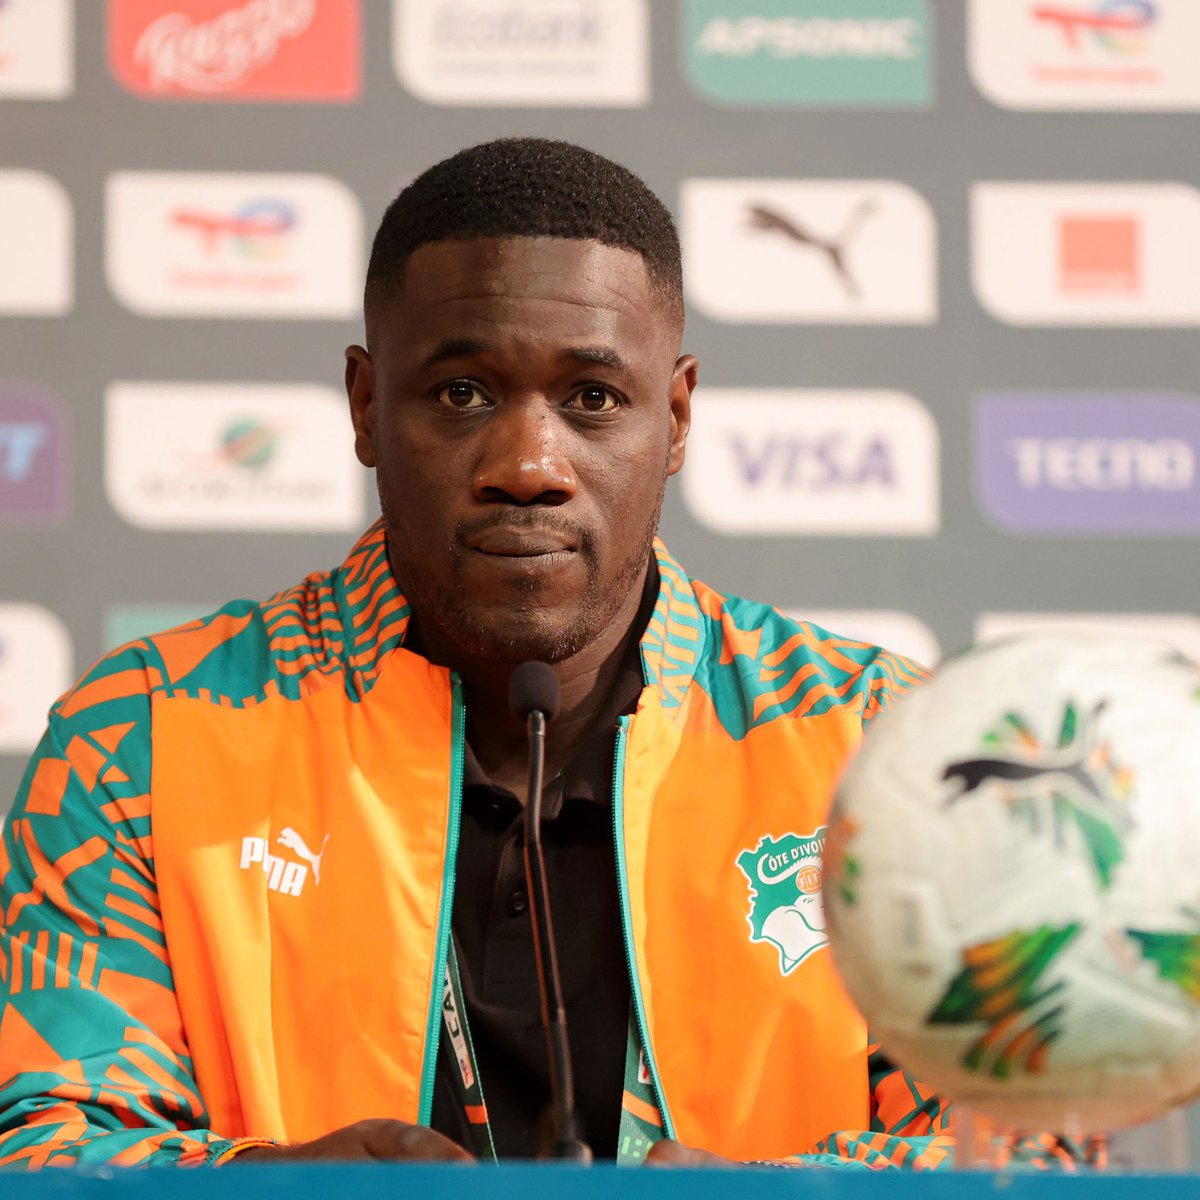 Three weeks into the job and Emerse Faé has guided Côte d’Ivoire 🇨🇮 to the AFCON 2023 trophy at home. There’s no better script to greatness.